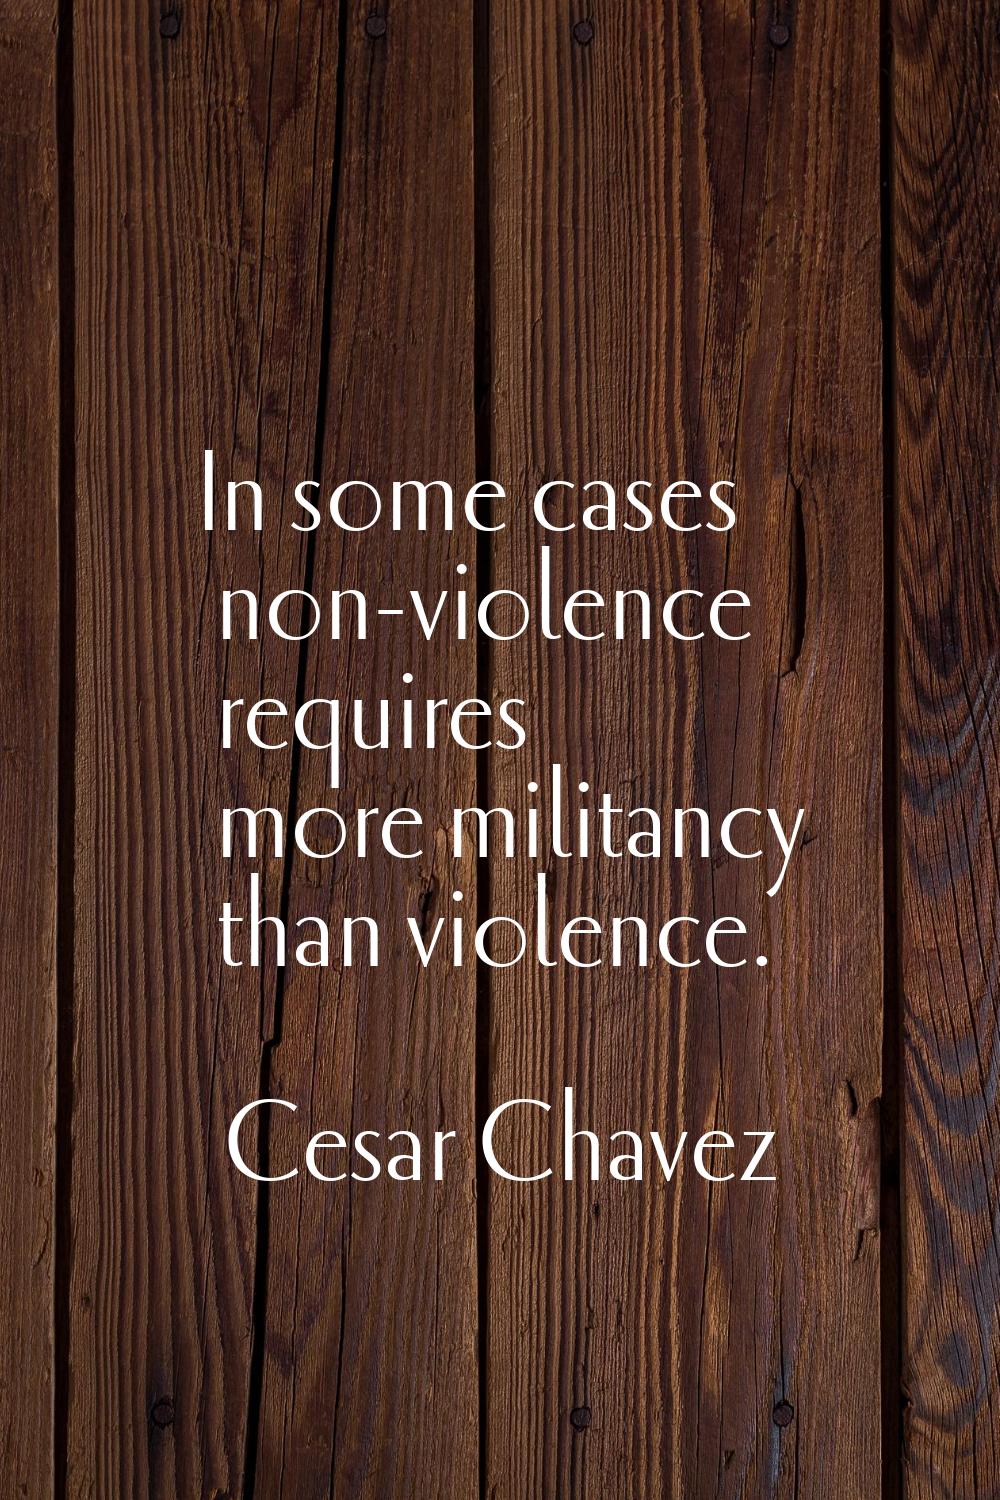 In some cases non-violence requires more militancy than violence.